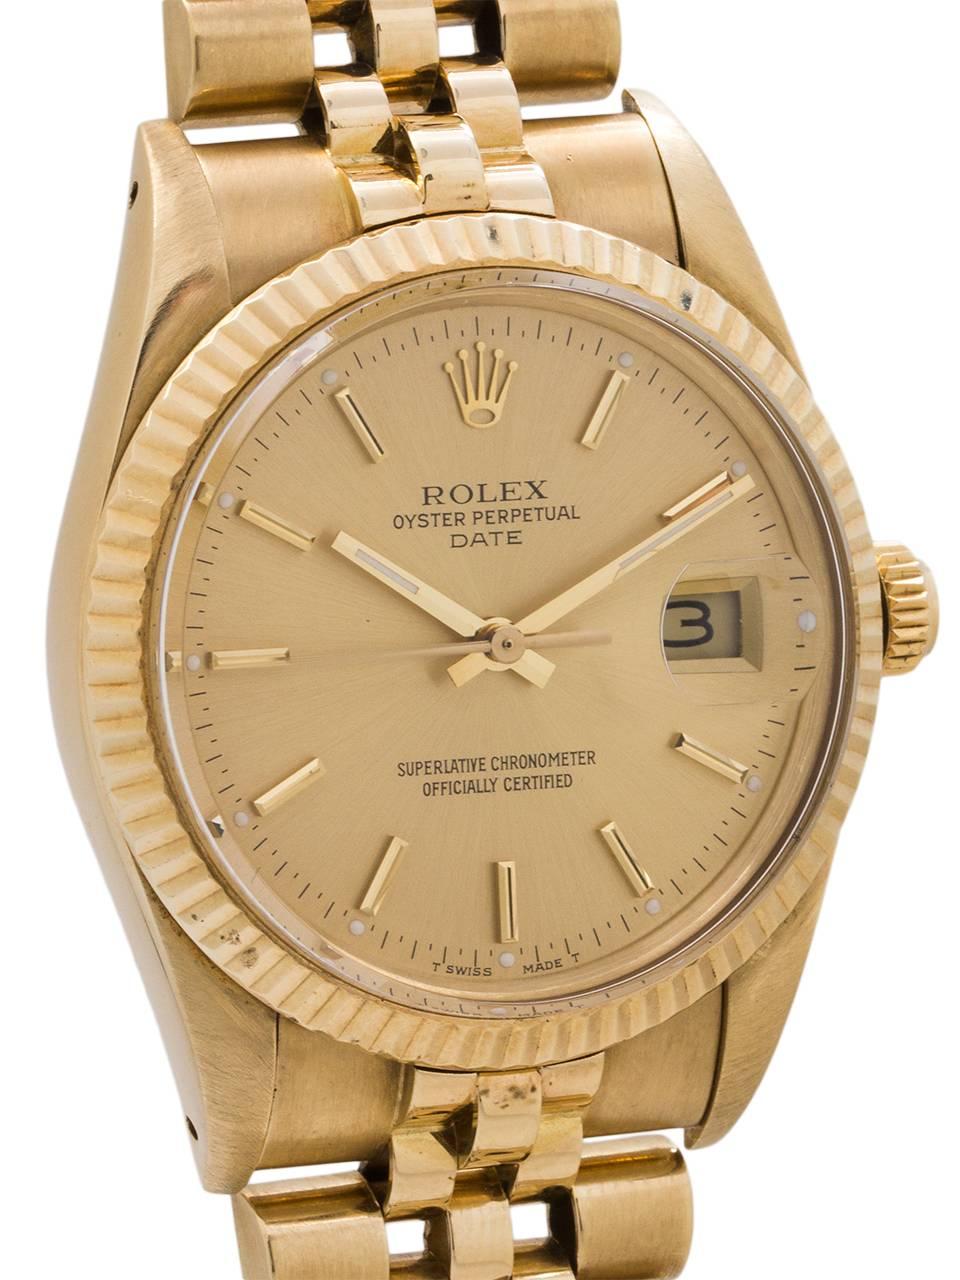 
Rolex Oyster Perpetual Date ref 15037 serial # 9.8 million circa 1987. Featuring a 34mm diameter case with fluted bezel, acrylic crystal, and original champagne dial with applied gold indexes and gilt baton hands. Powered by caliber 3035 self